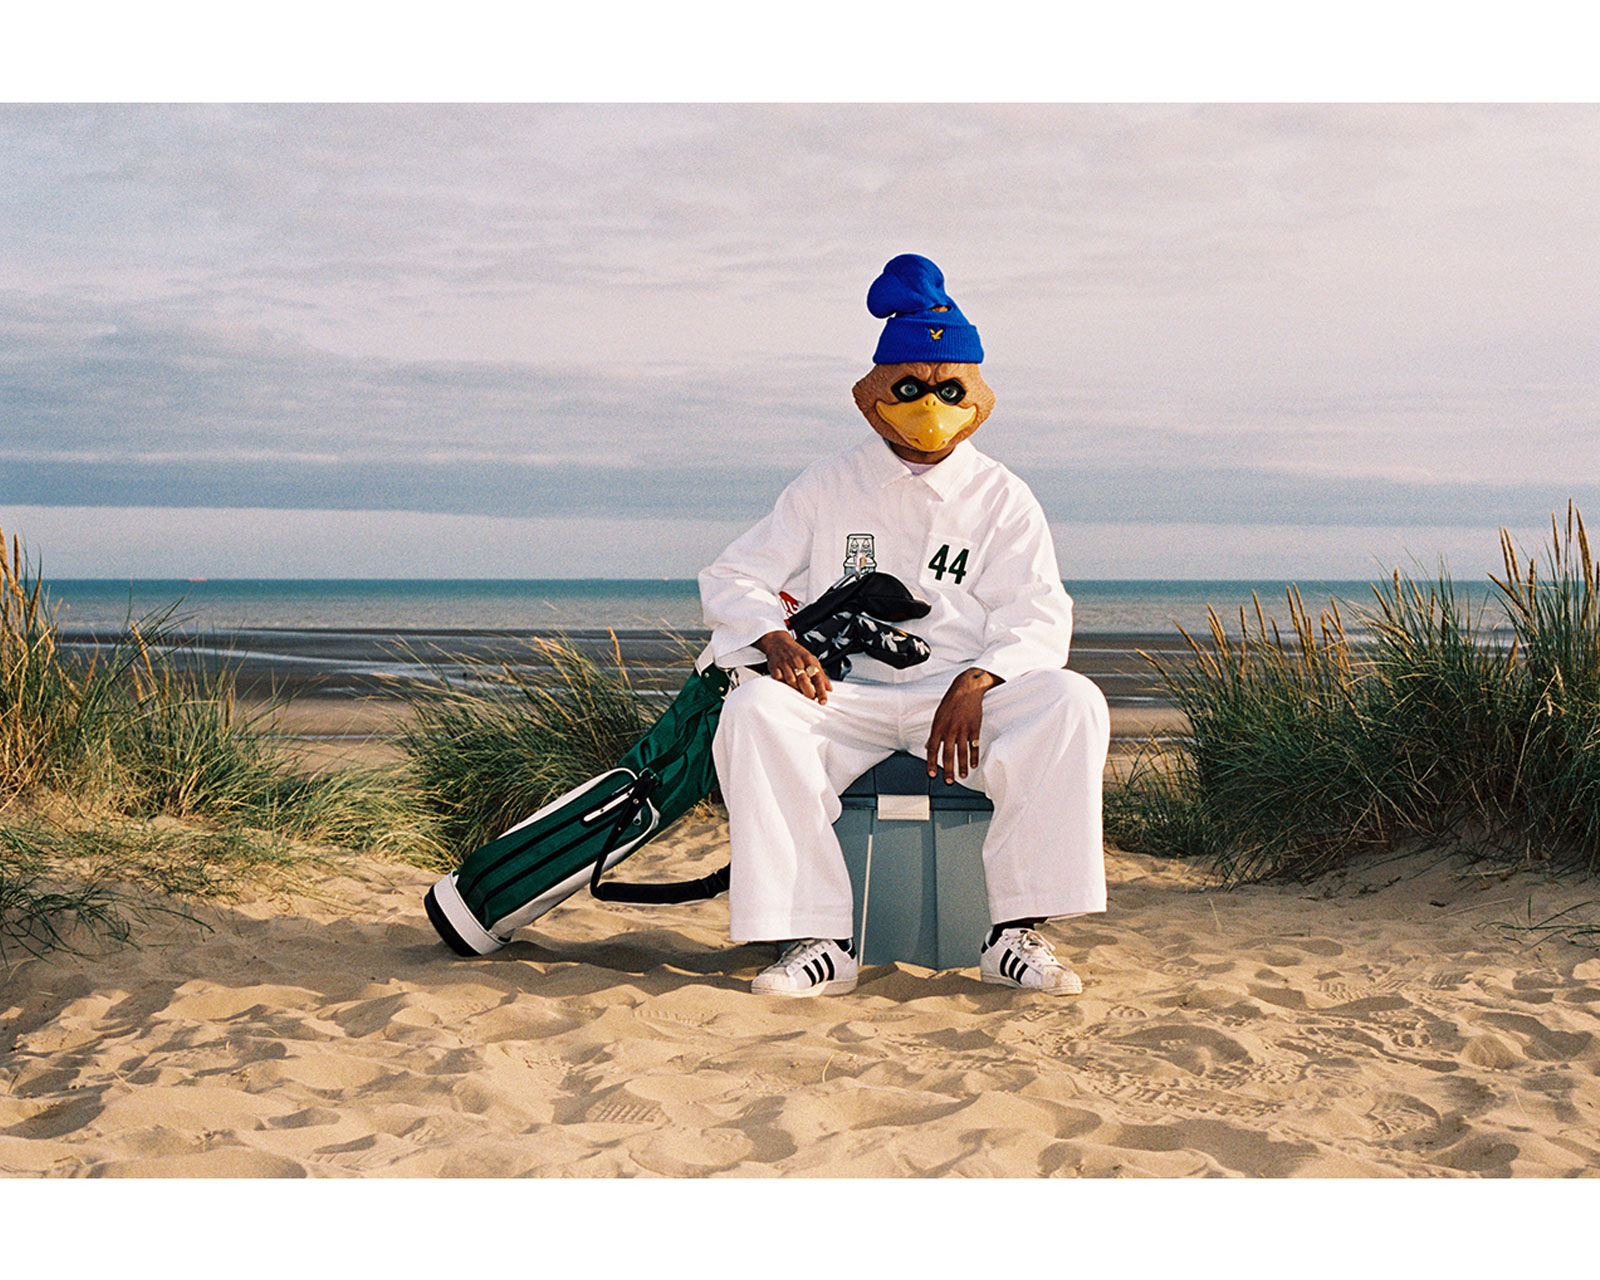 Lyle & Scott and Golfickers believe golf can transform from an Ugly Duckling into a soaring Eagle